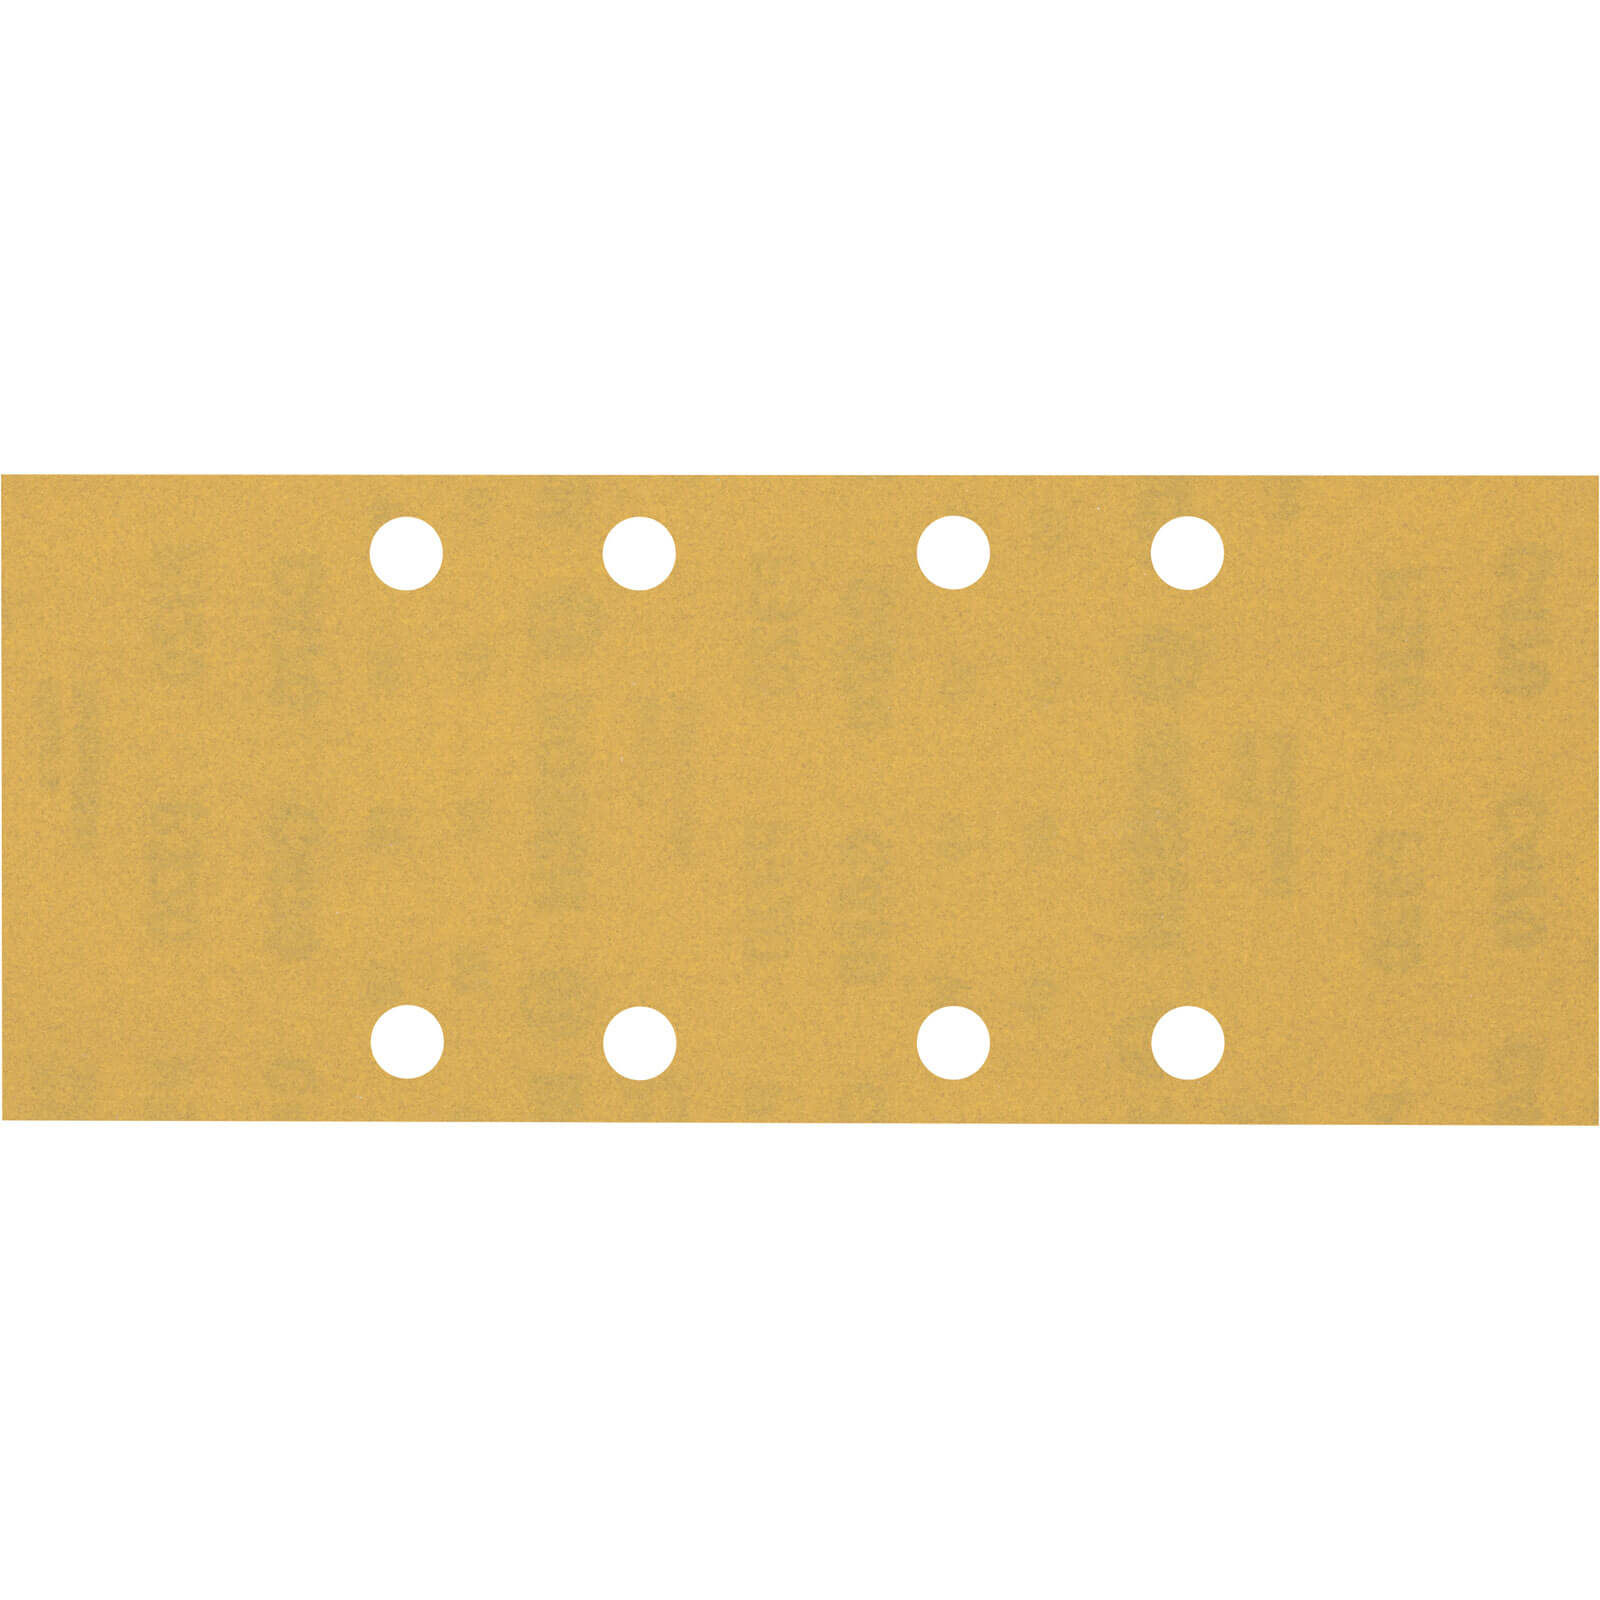 Image of Bosch Expert C470 Best for Wood and Paint Sanding Sheets 93mm x 230mm 320g Pack of 10